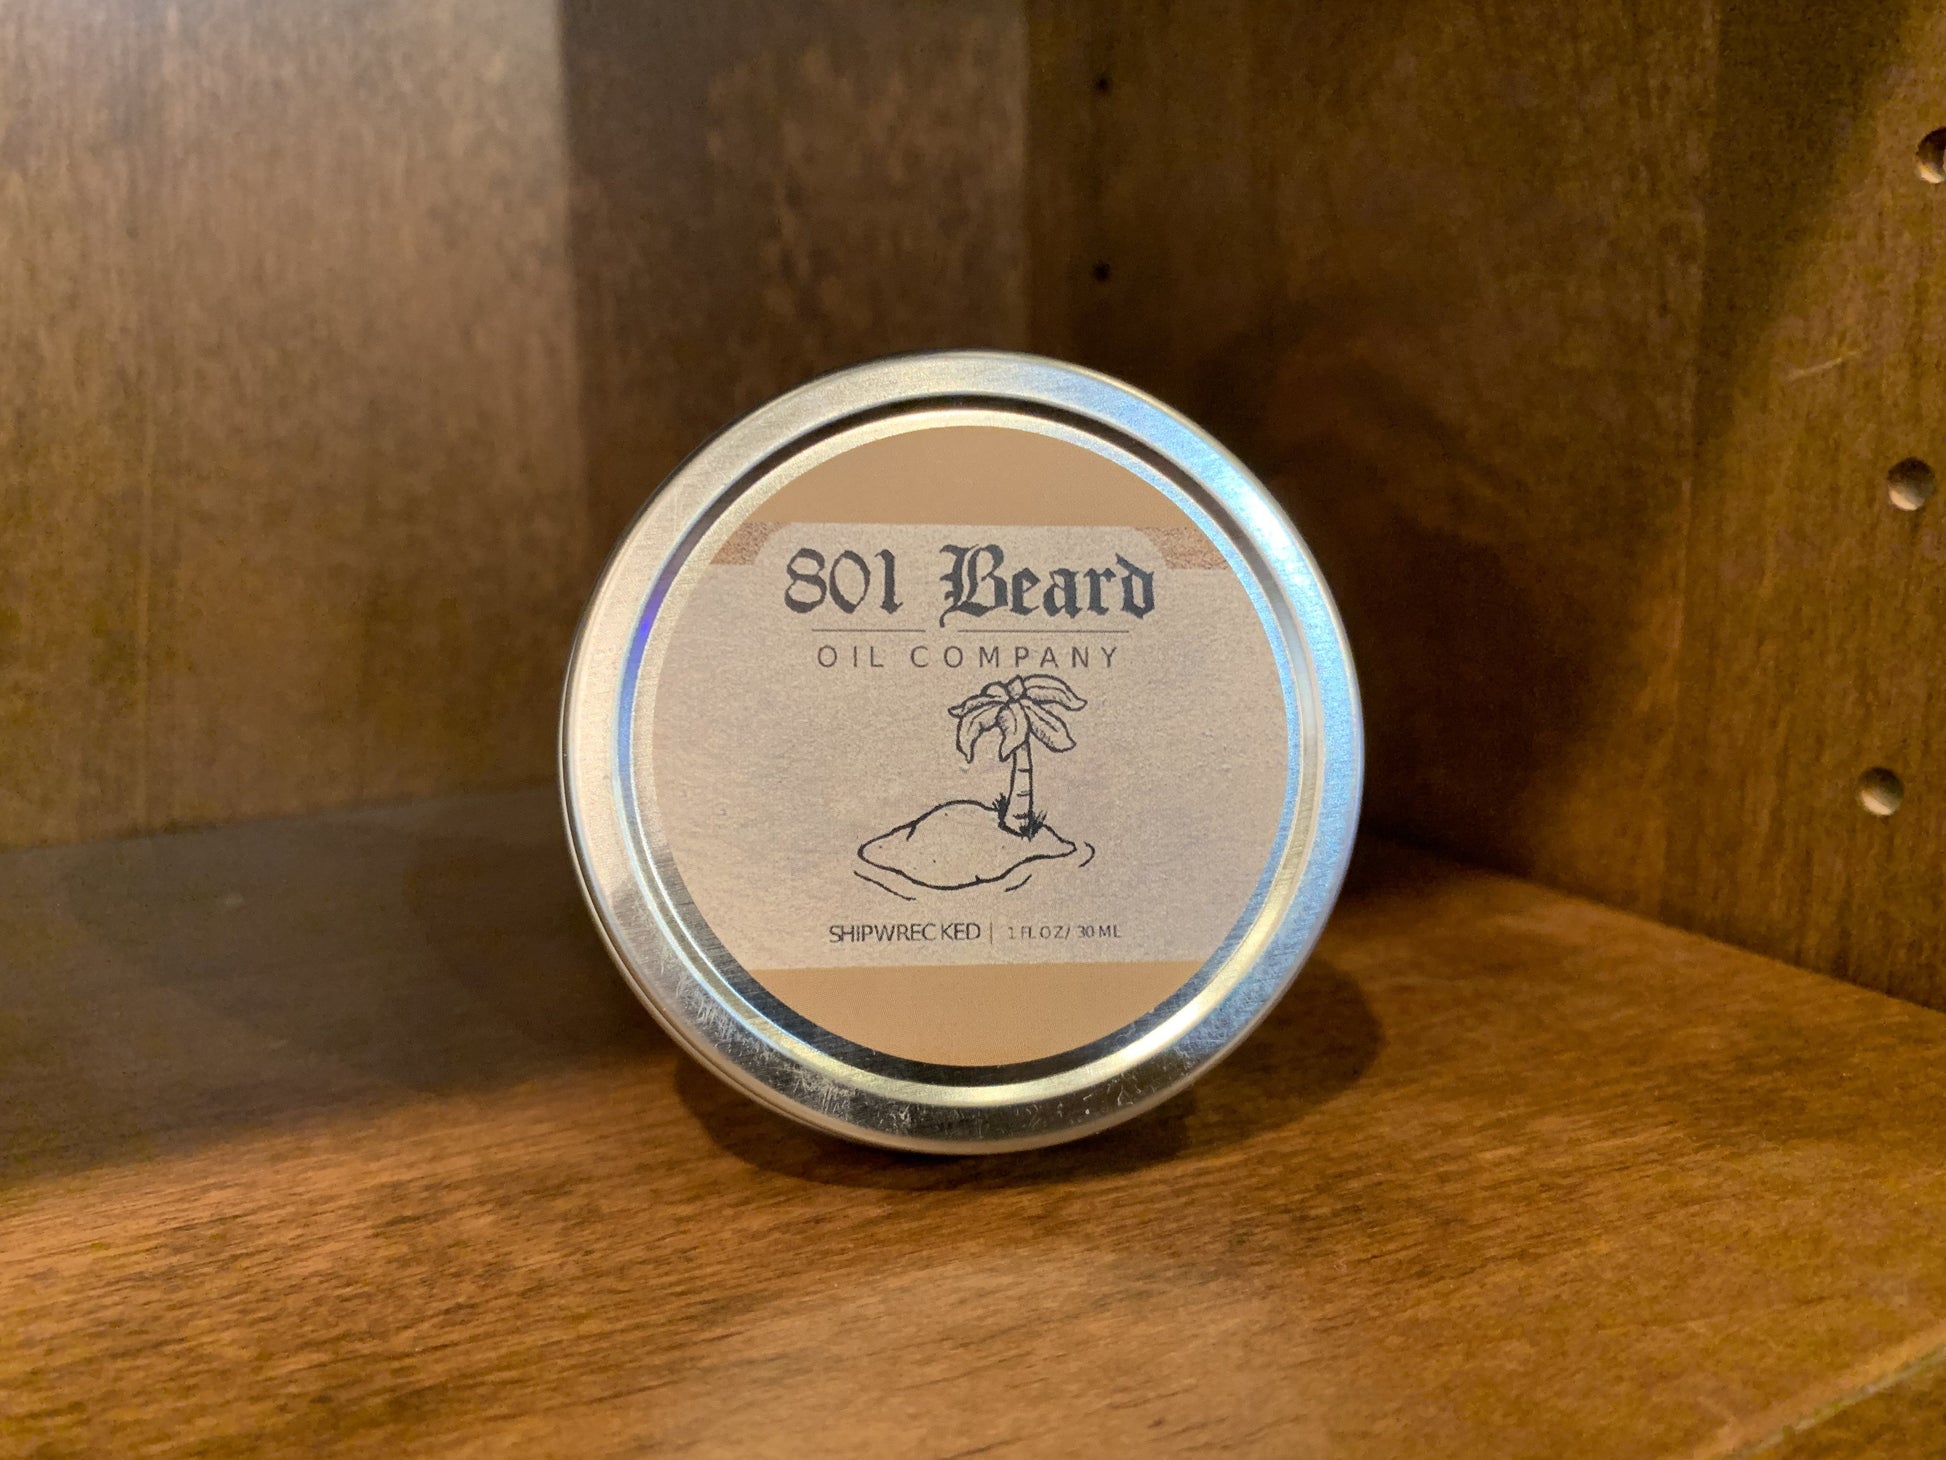 This 801 Beard Balm has a more dense formula than regular balms, while still being creamy. This balm gives the perfect balance providing both perfect texture and a better hold and control for more stubborn beards and mustaches. This Beard oil works marvels for the men who want a longer, fuller and healthier beard with scents that invigorate and excite. Sold at Mini Moustachery, the all-in-one mens care, grooming, and barber supply depot.